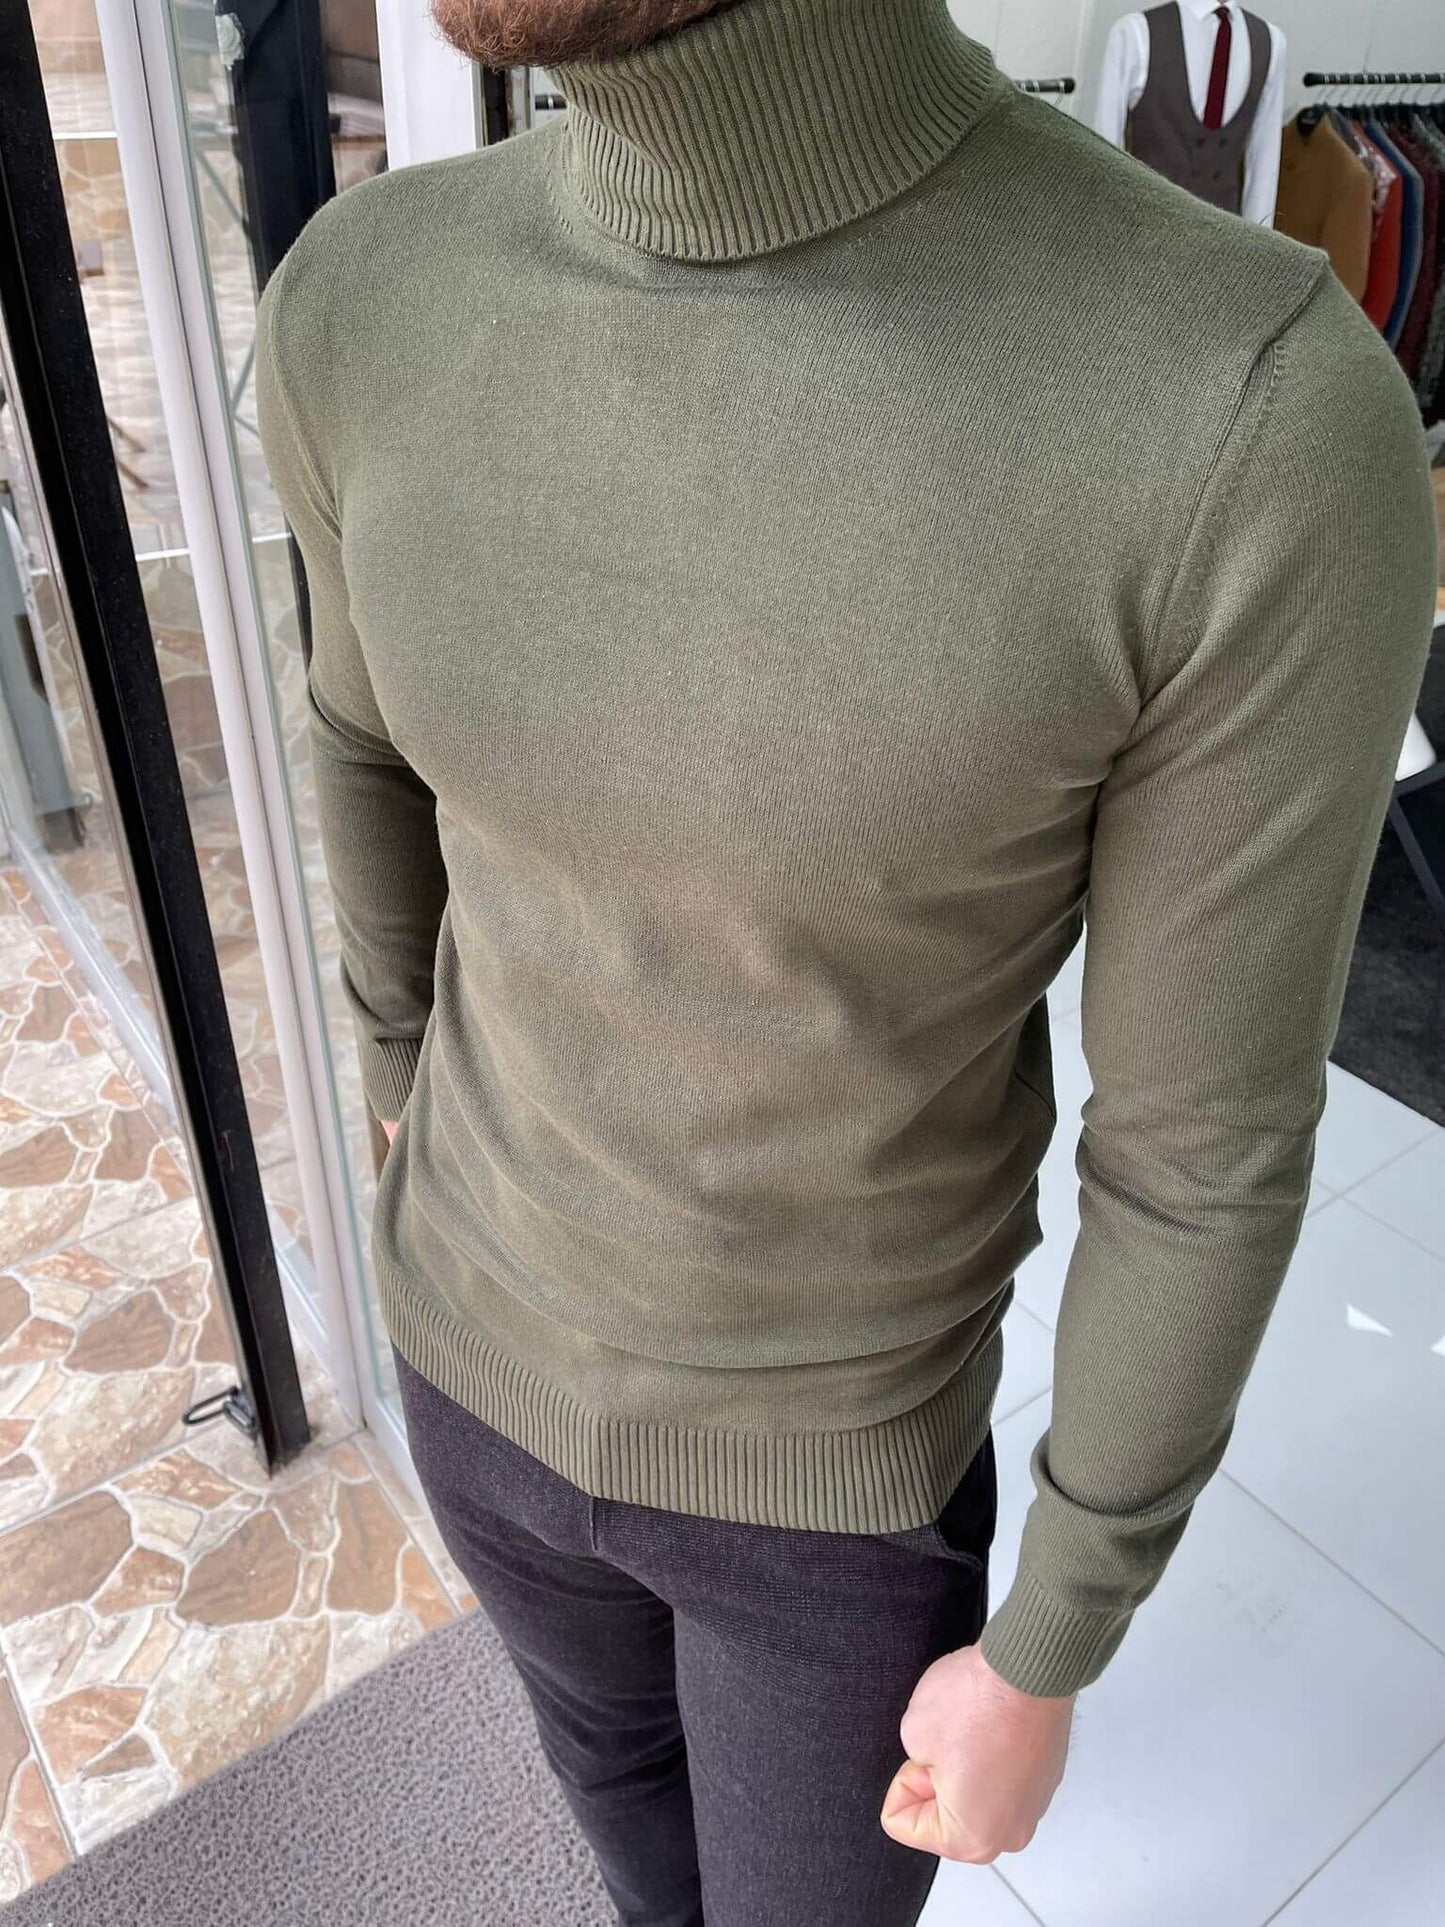 A khaki turtleneck sweater, a cozy and stylish garment with a high, folded collar, in a warm khaki color."